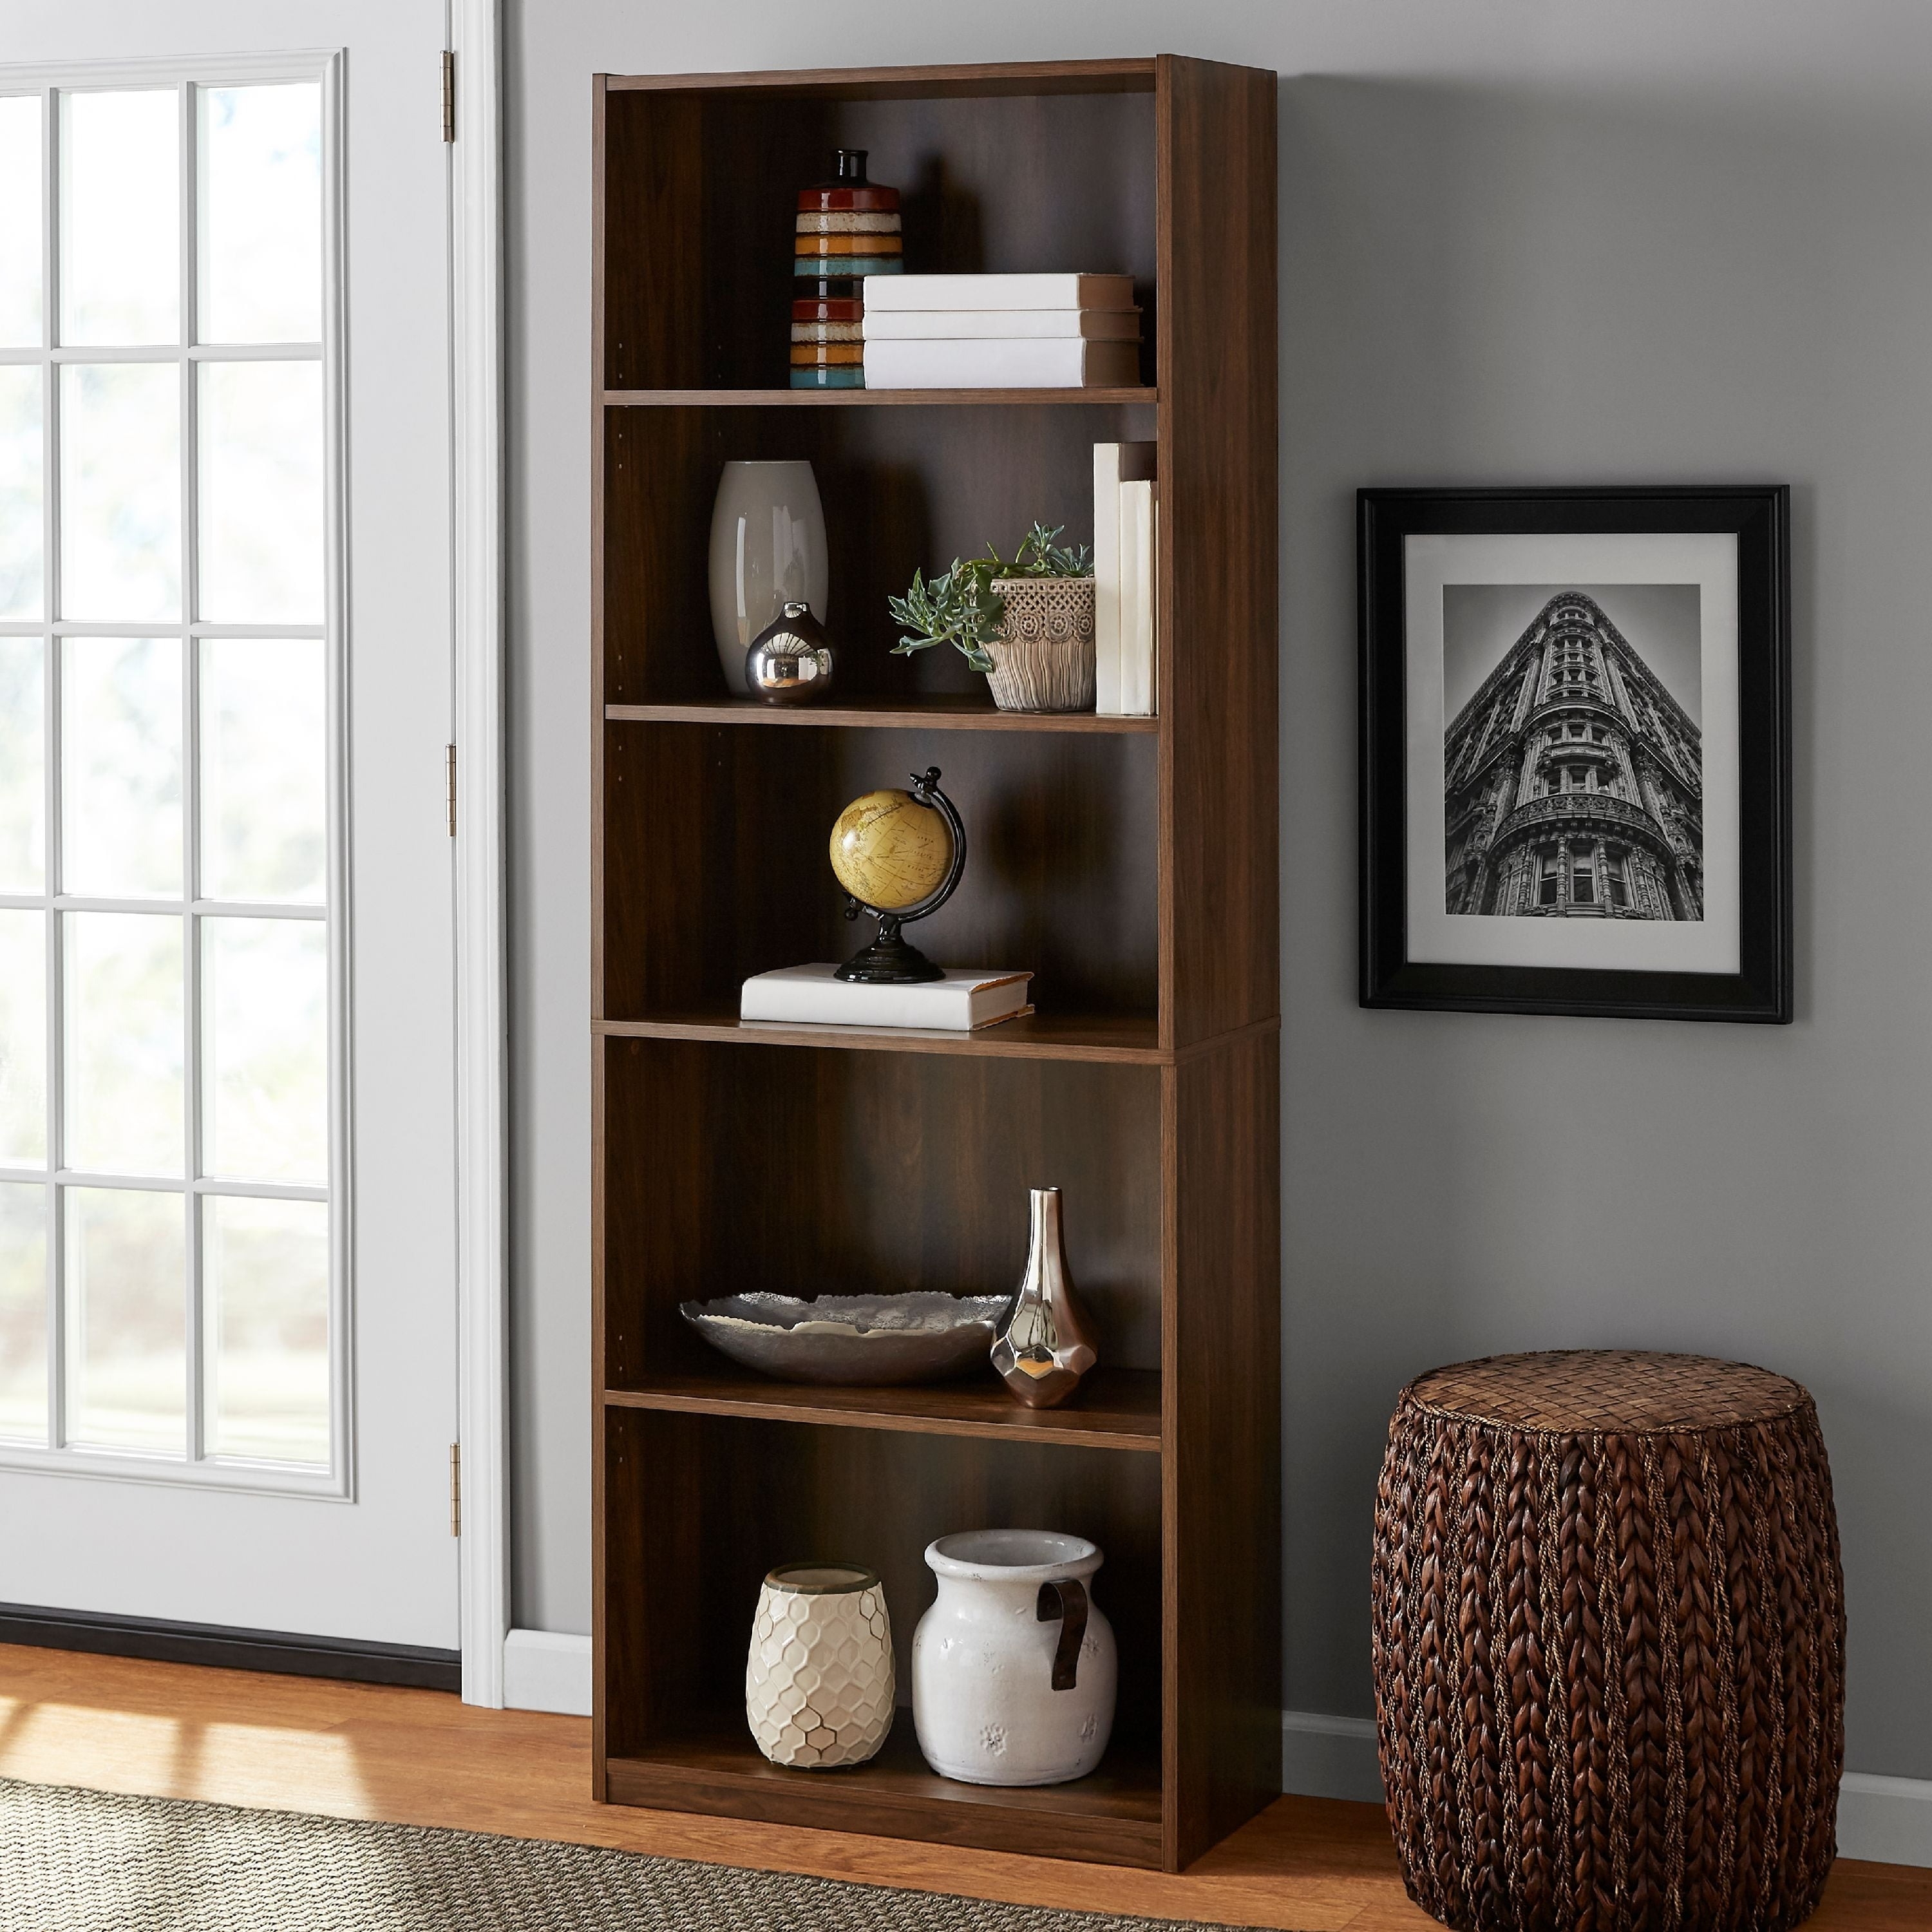 the walnut bookcase with decor inside